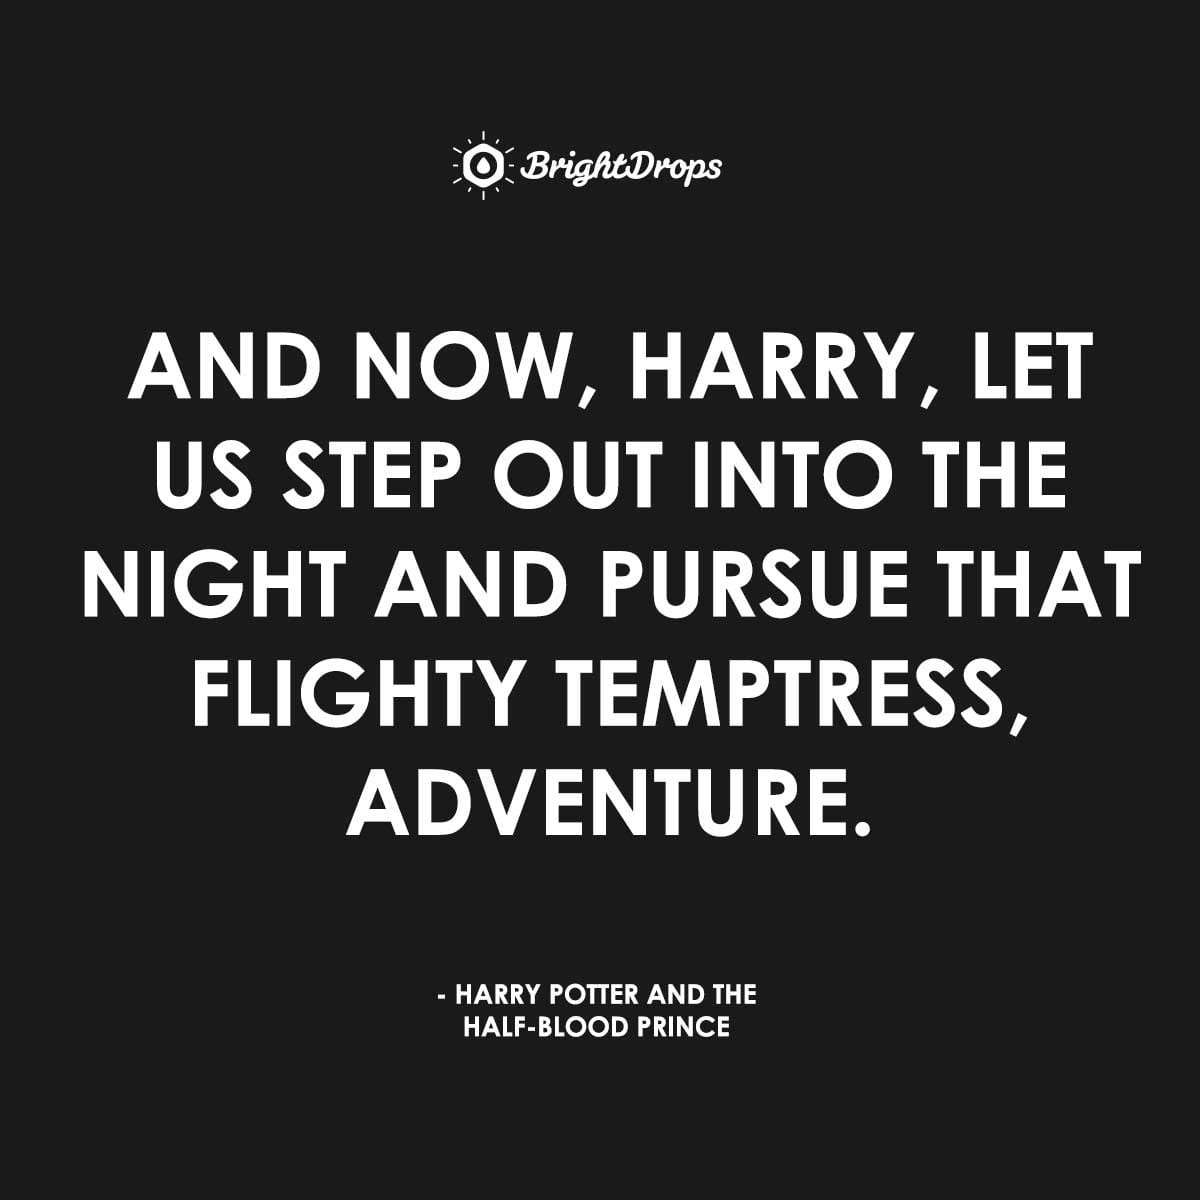 Harry Potter Motivational Quotes
 36 Inspirational Harry Potter Quotes for a Braver You